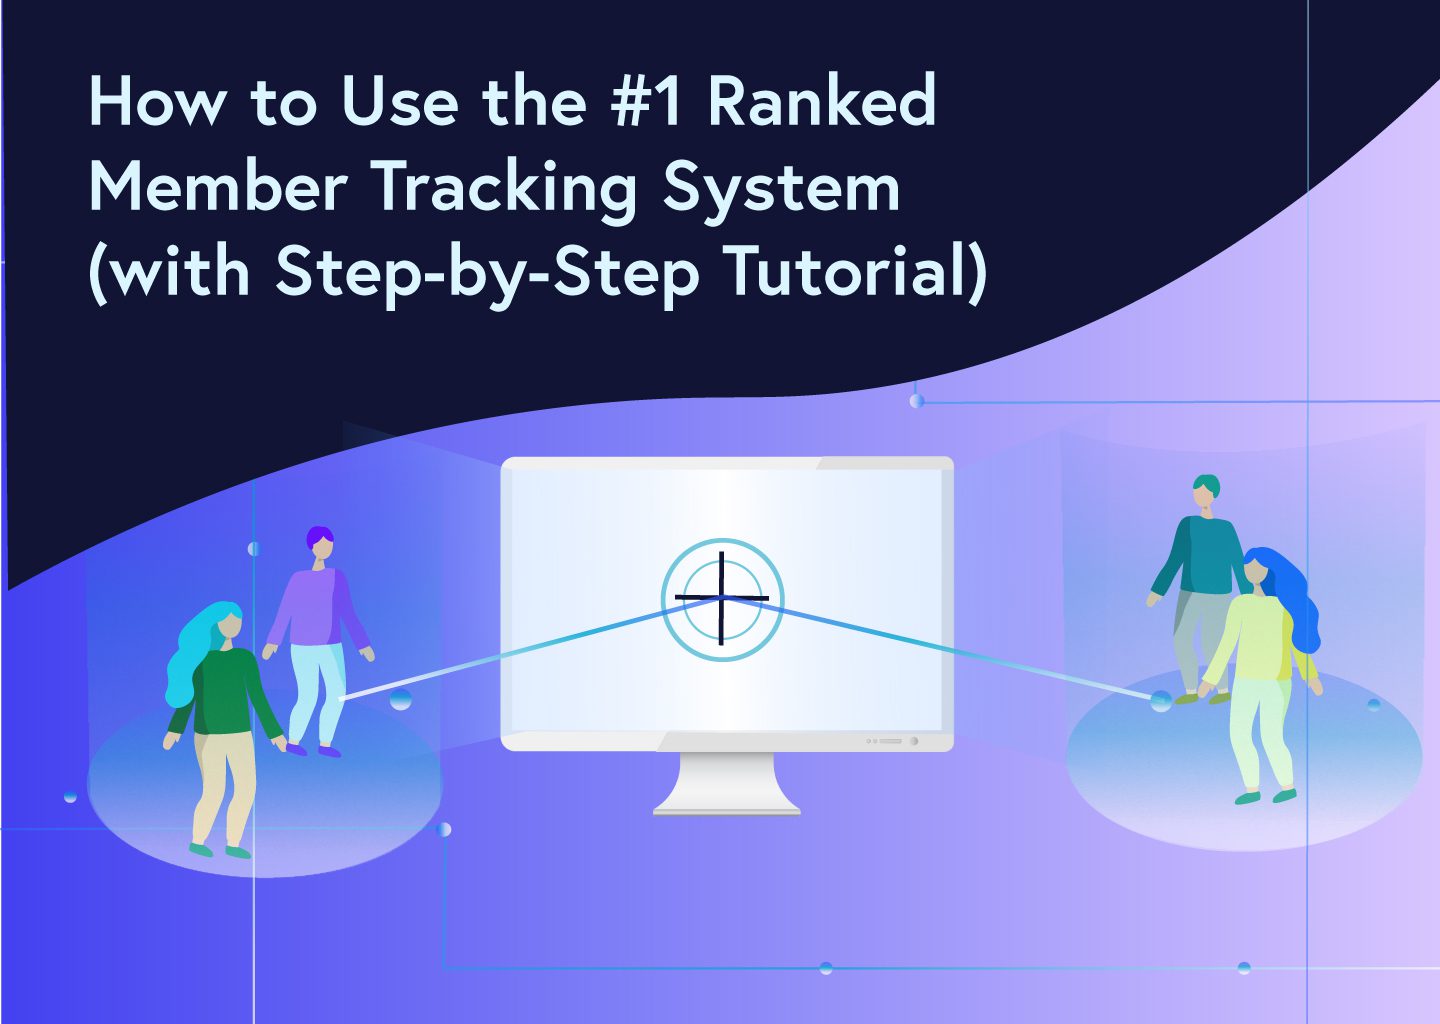 How to Use the #1 Ranked Member Tracking System (With Step-by-Step Tutorial)